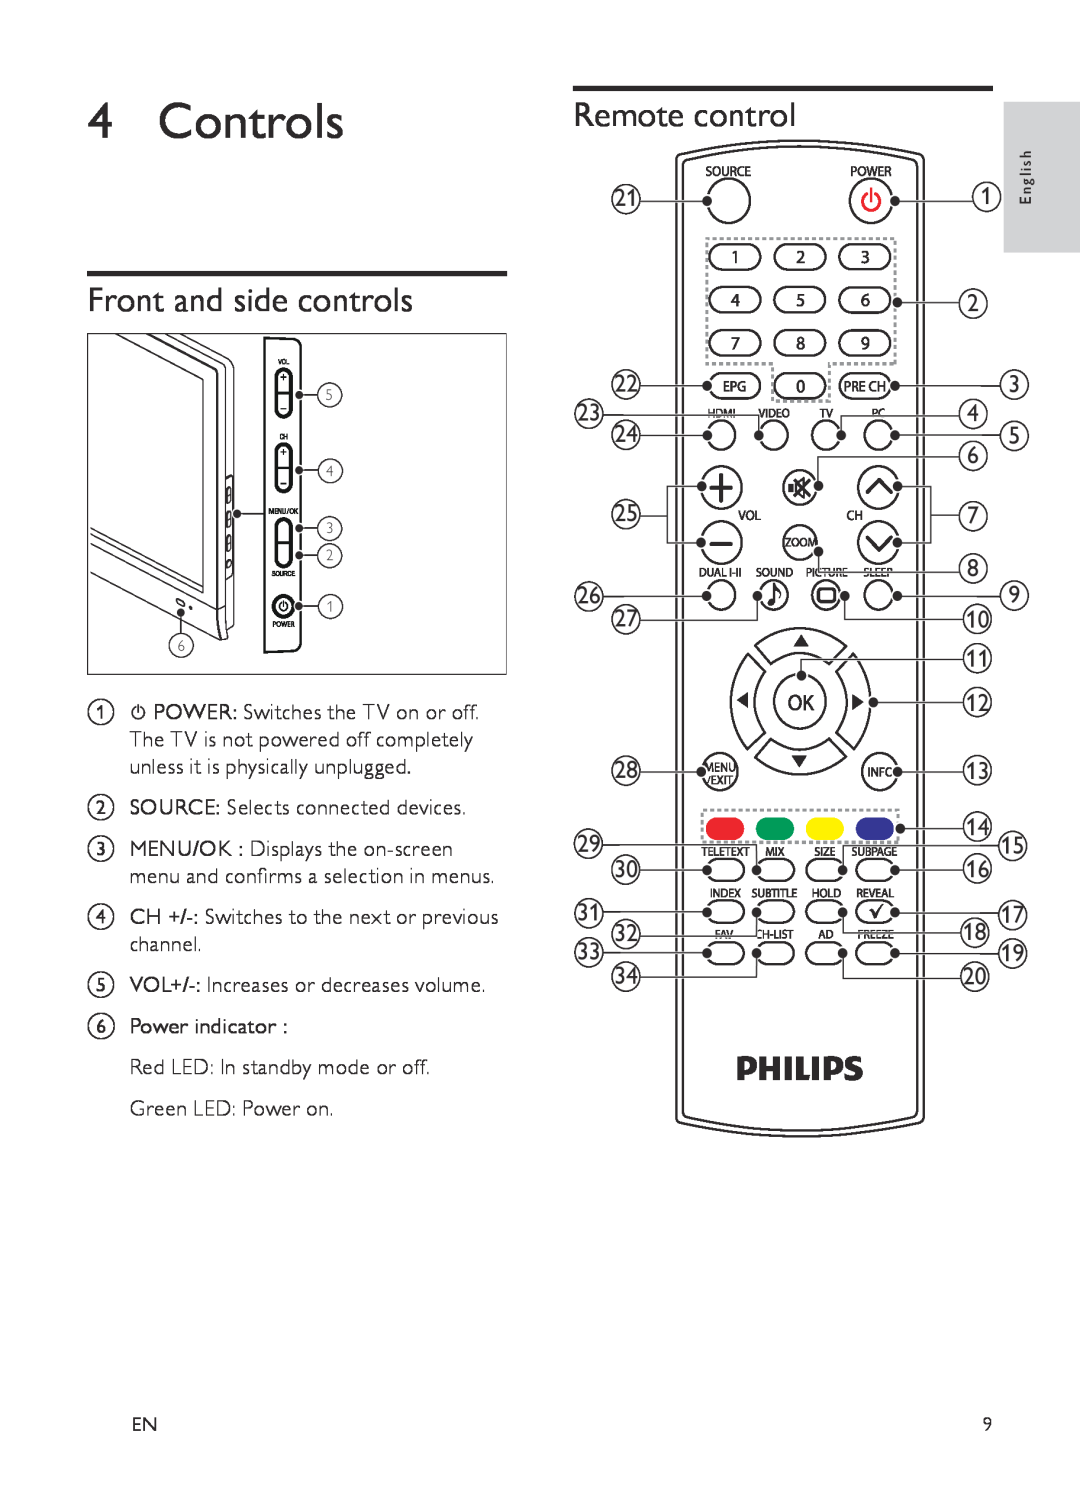 Philips 221T1, 231T1, 201T1SB/00 user manual Controls, Remote control, Front and side controls 